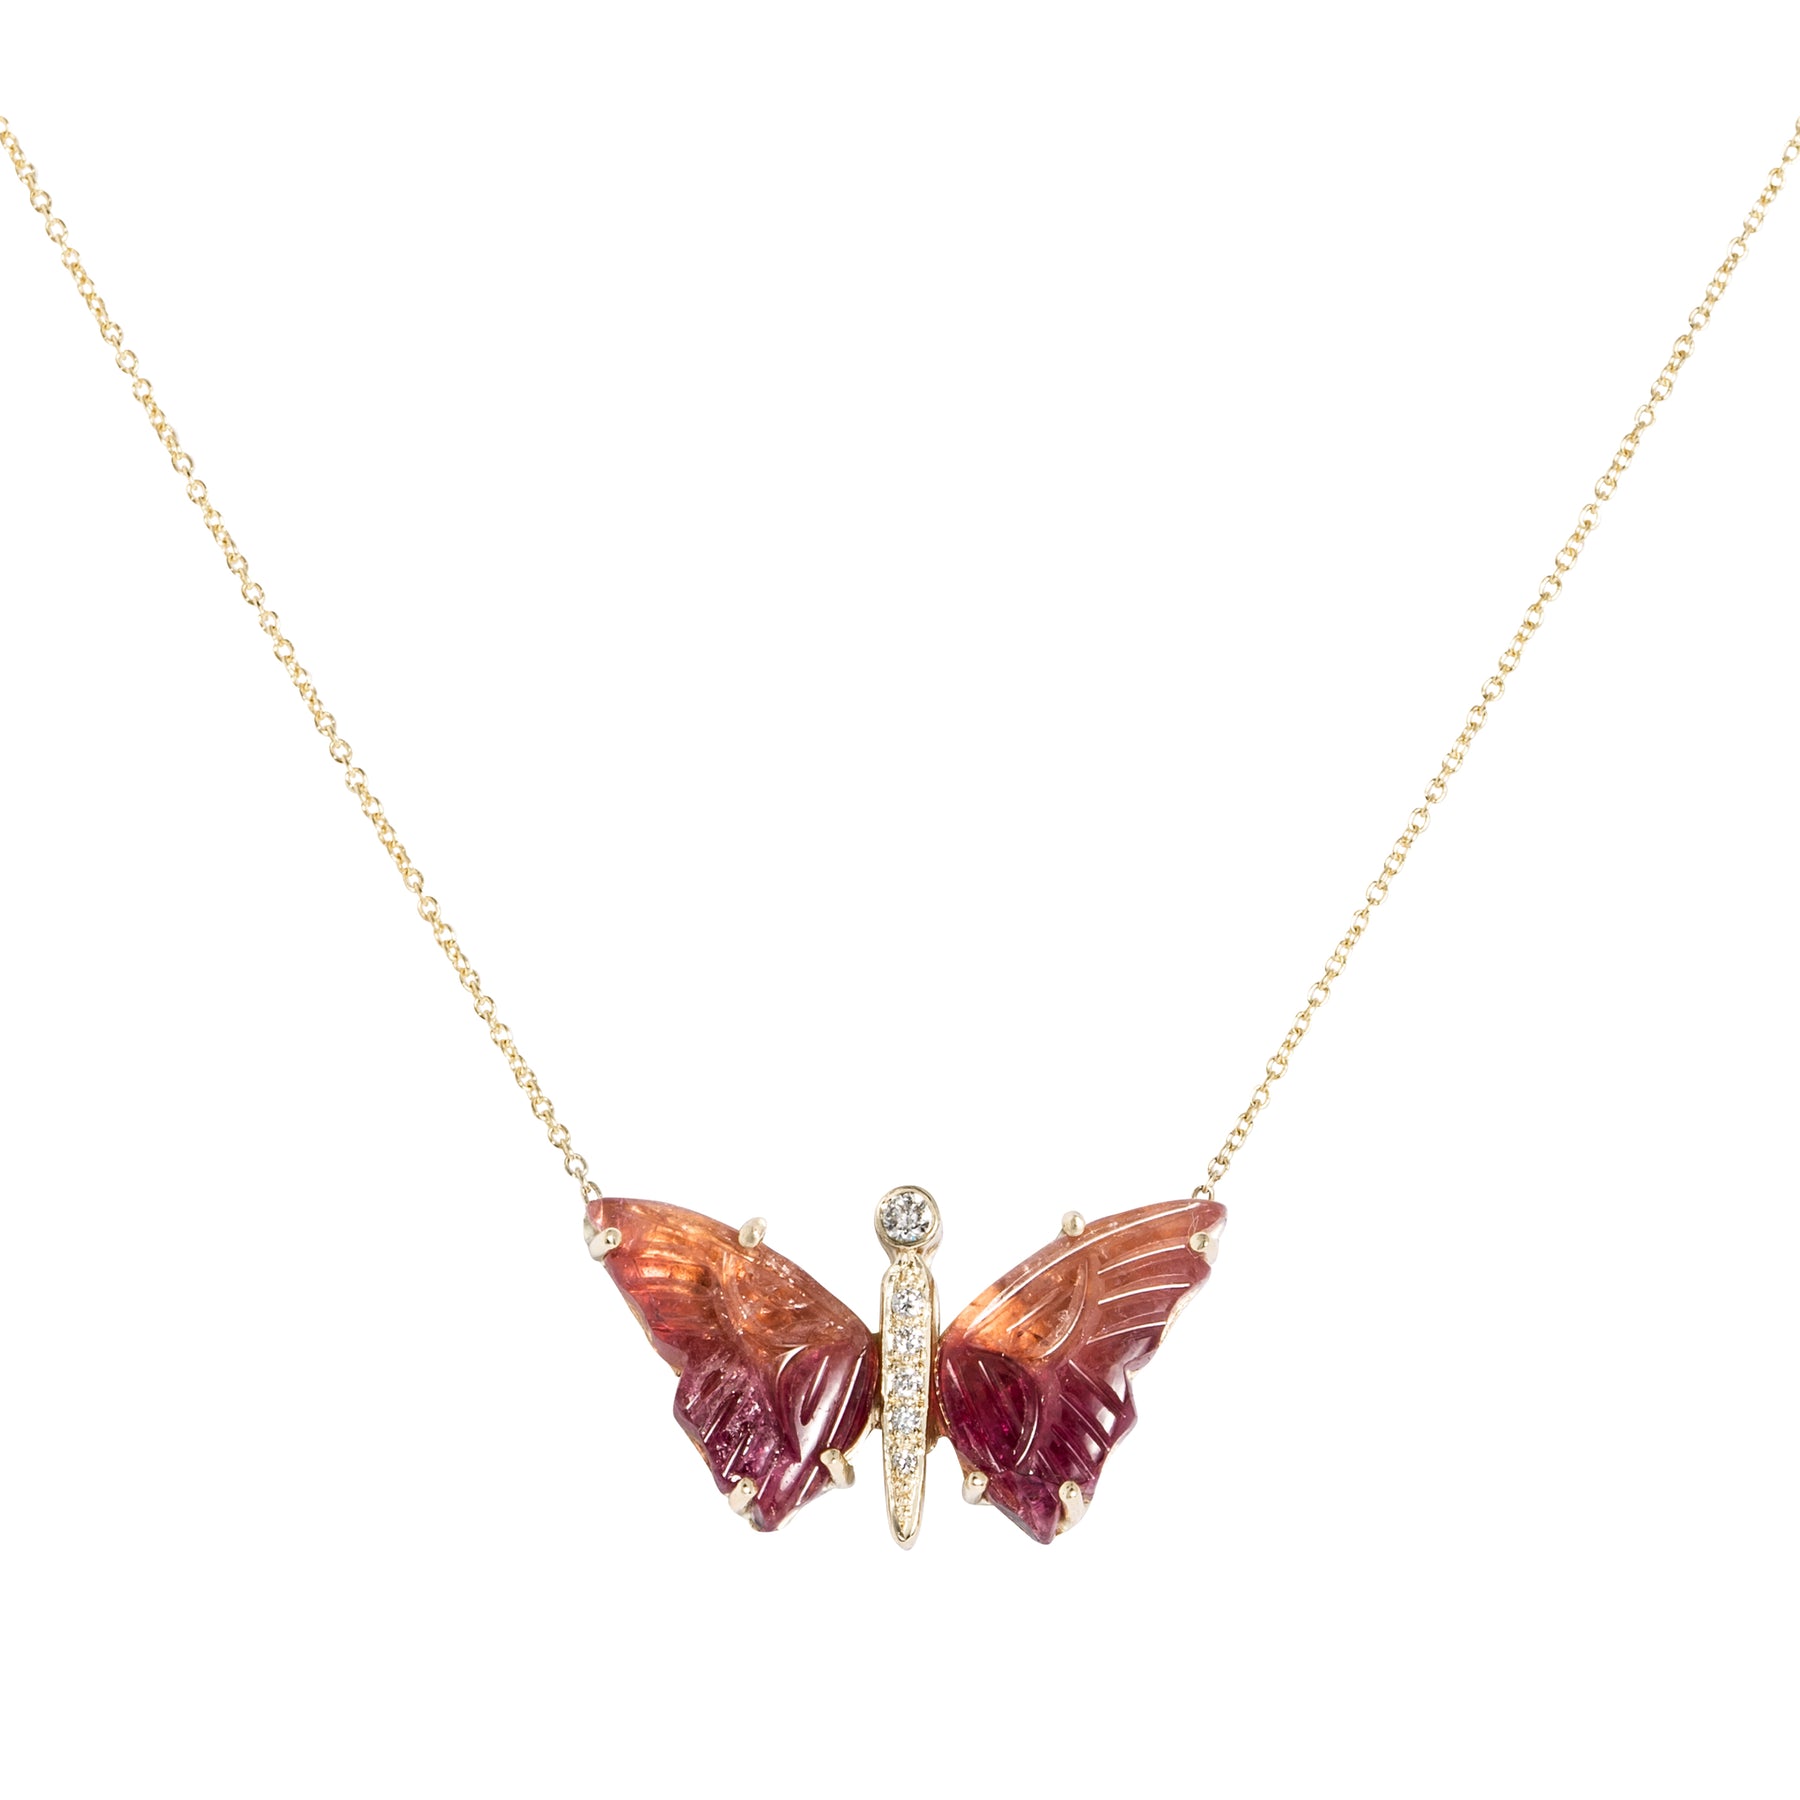 Pink Peach Tourmaline Carved Butterfly Necklace - Nina Segal Jewelry